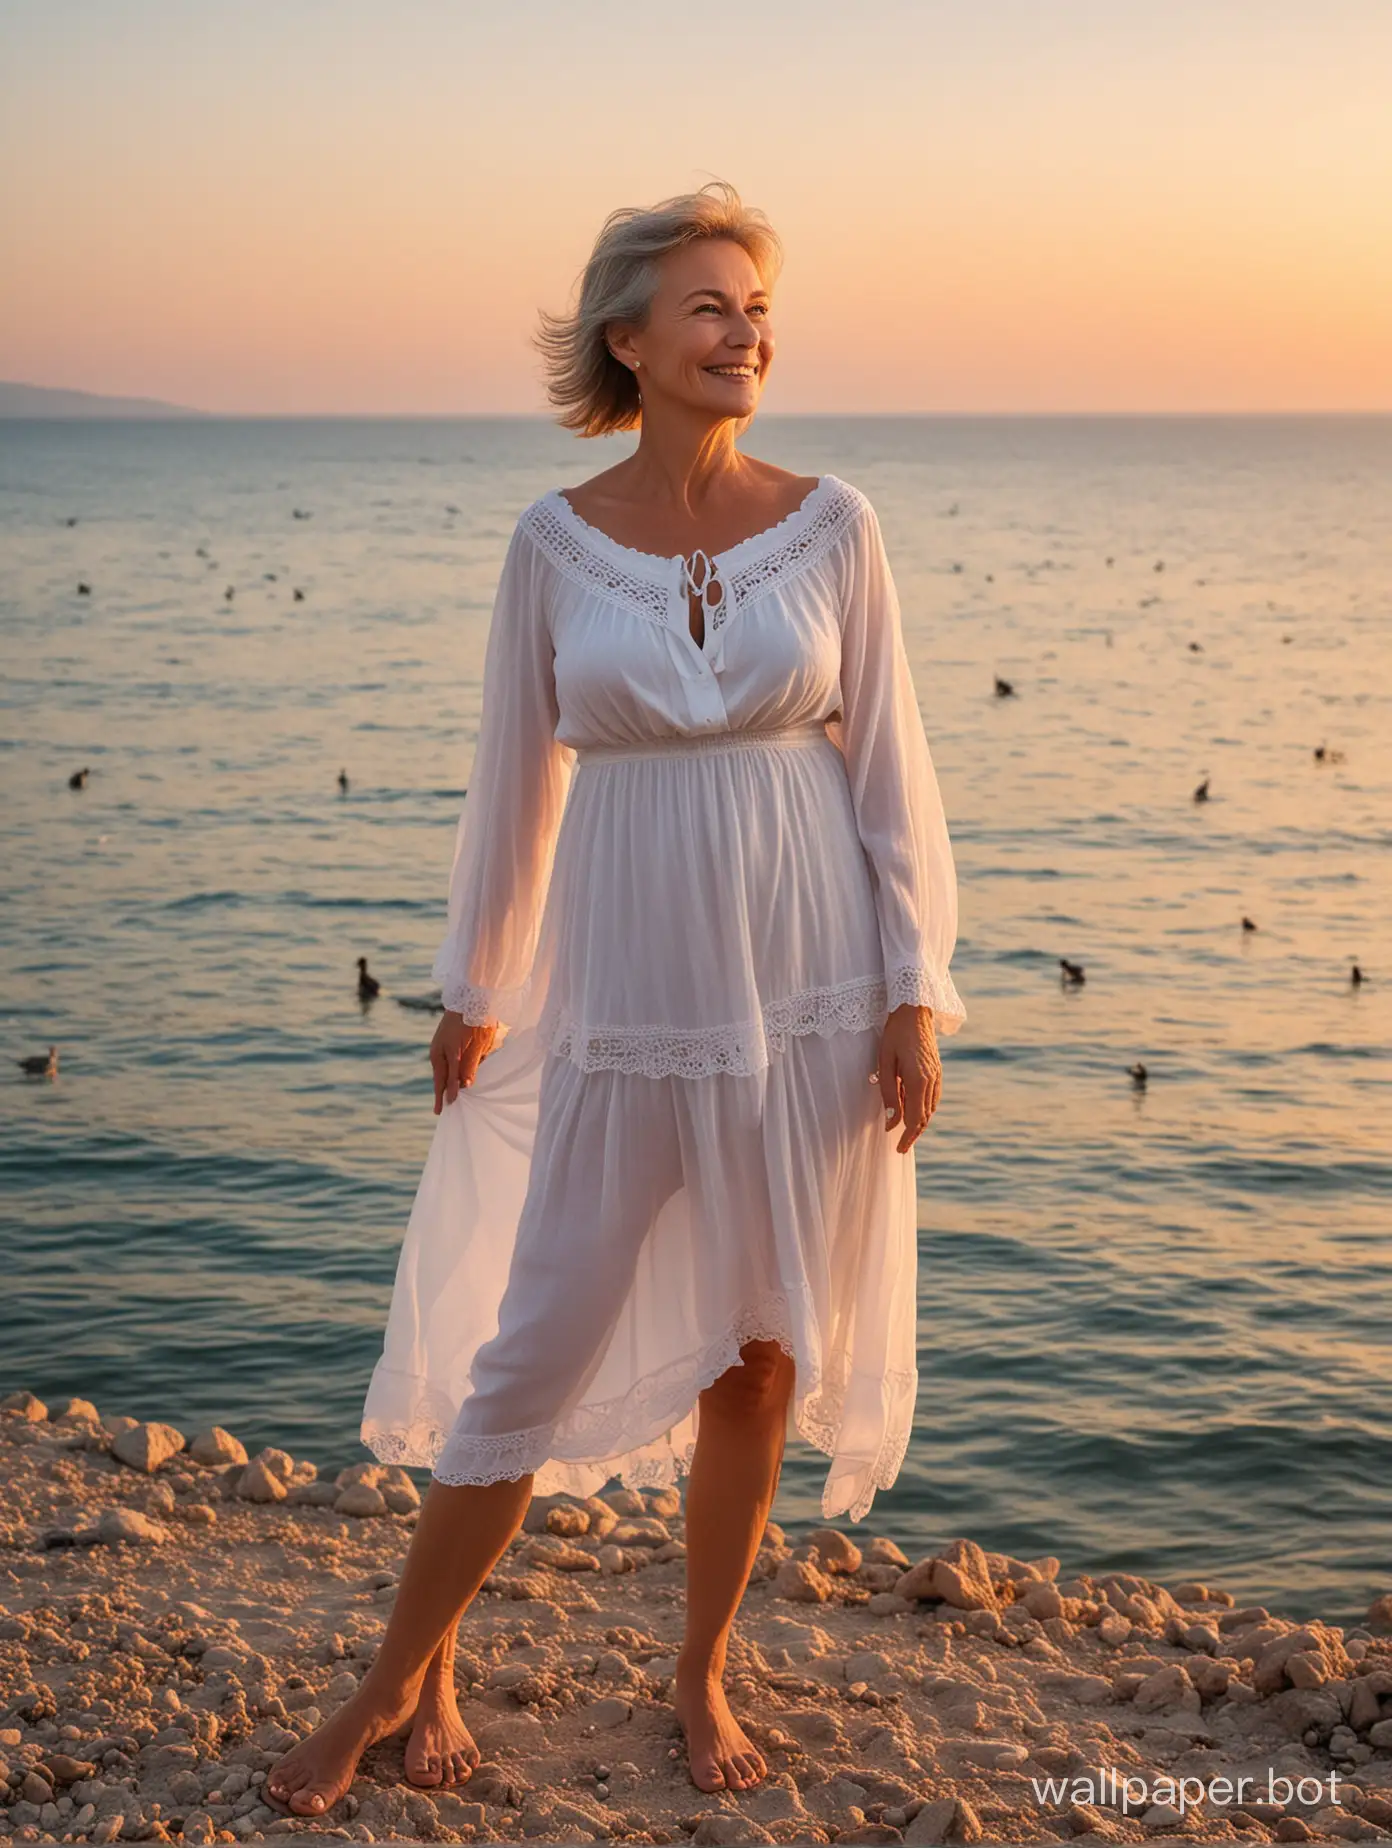 Russian woman 60 years old at sunset by the sea in Crimea, full height, dynamic poses, birds, ordinary figure, posing, smile